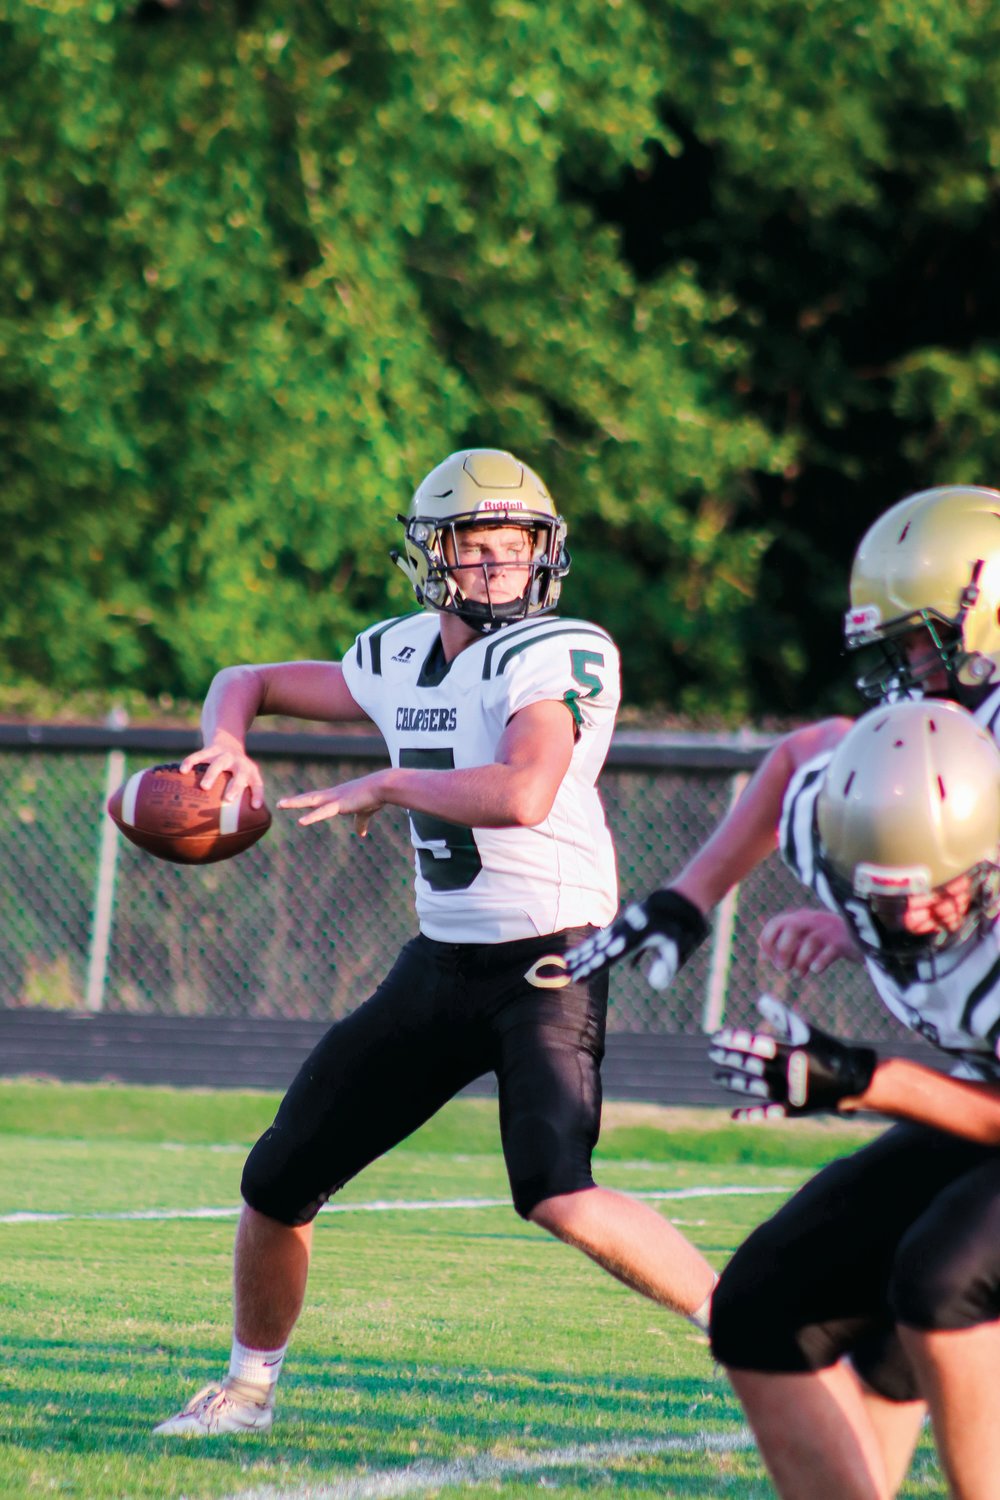 Northwood sophomore quarterback Carson Fortunes steps back to throw during the first half of the Chargers' 72-0 victory over Jordan-Matthews last Friday. Fortunes threw three passes on the night, each of which went for touchdowns.